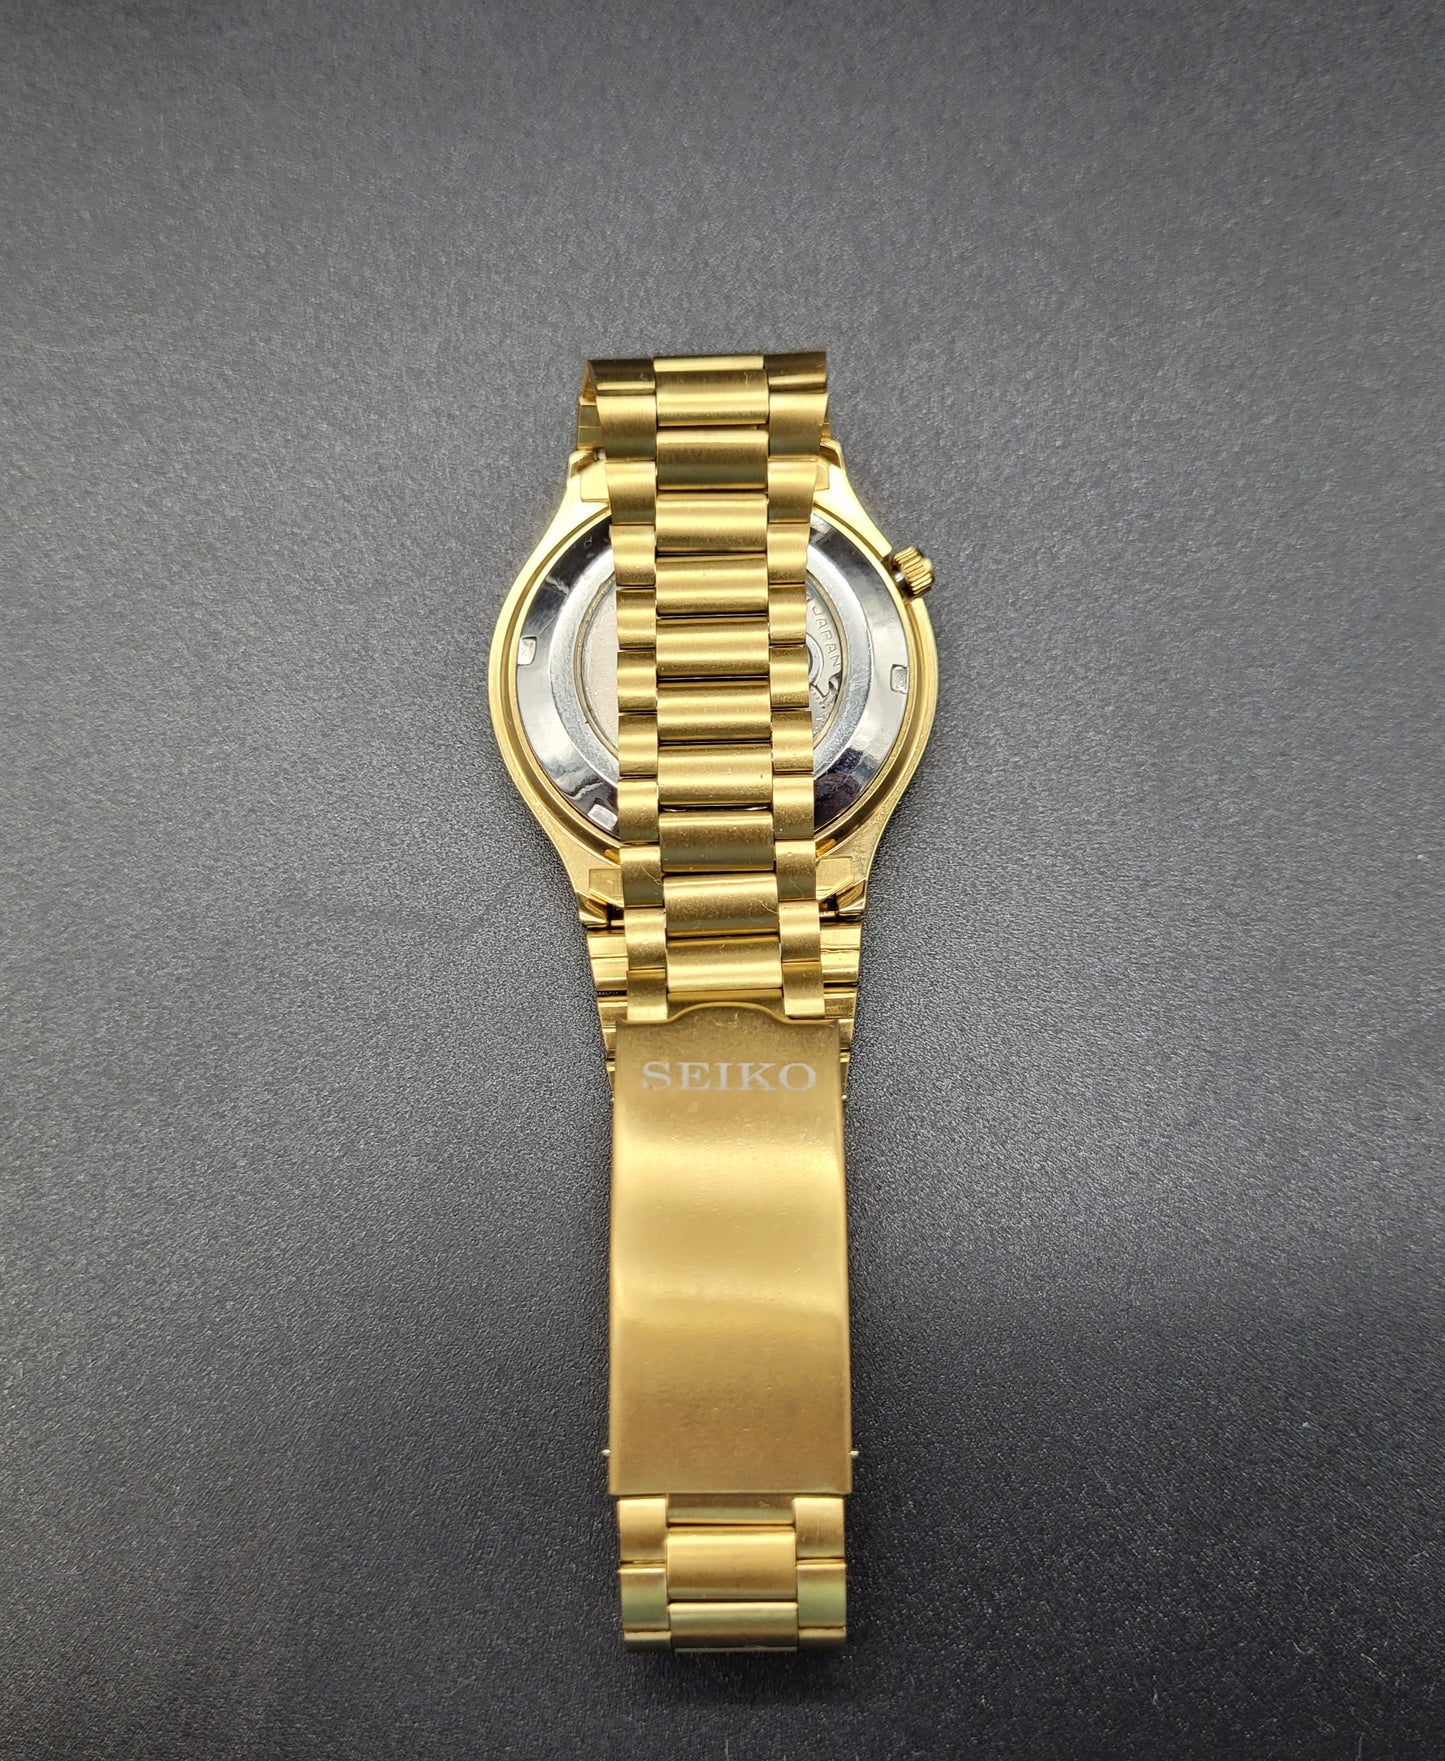 Vintage SEIKO Automatic Watch 17 Jewels Gold Plated buy watches online UK 